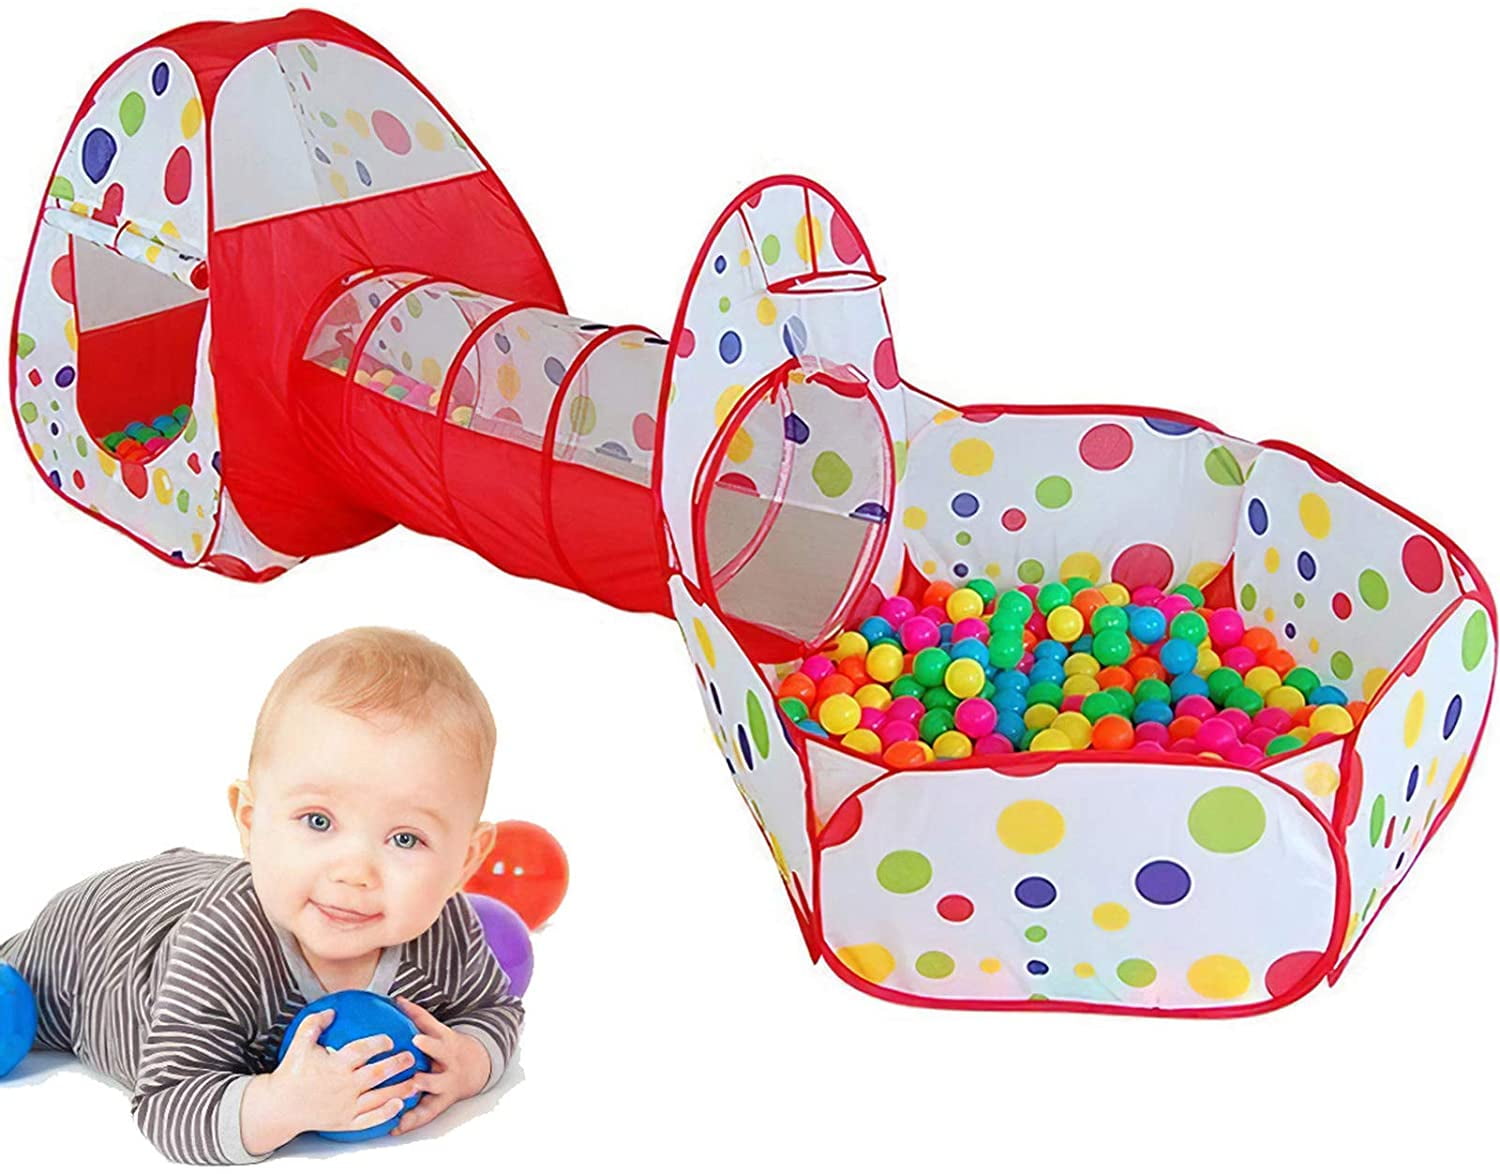 3in1 Kids Tent Crawling Toddlers Play House Baby Play Yard Tunnel Ball Pits Pool 